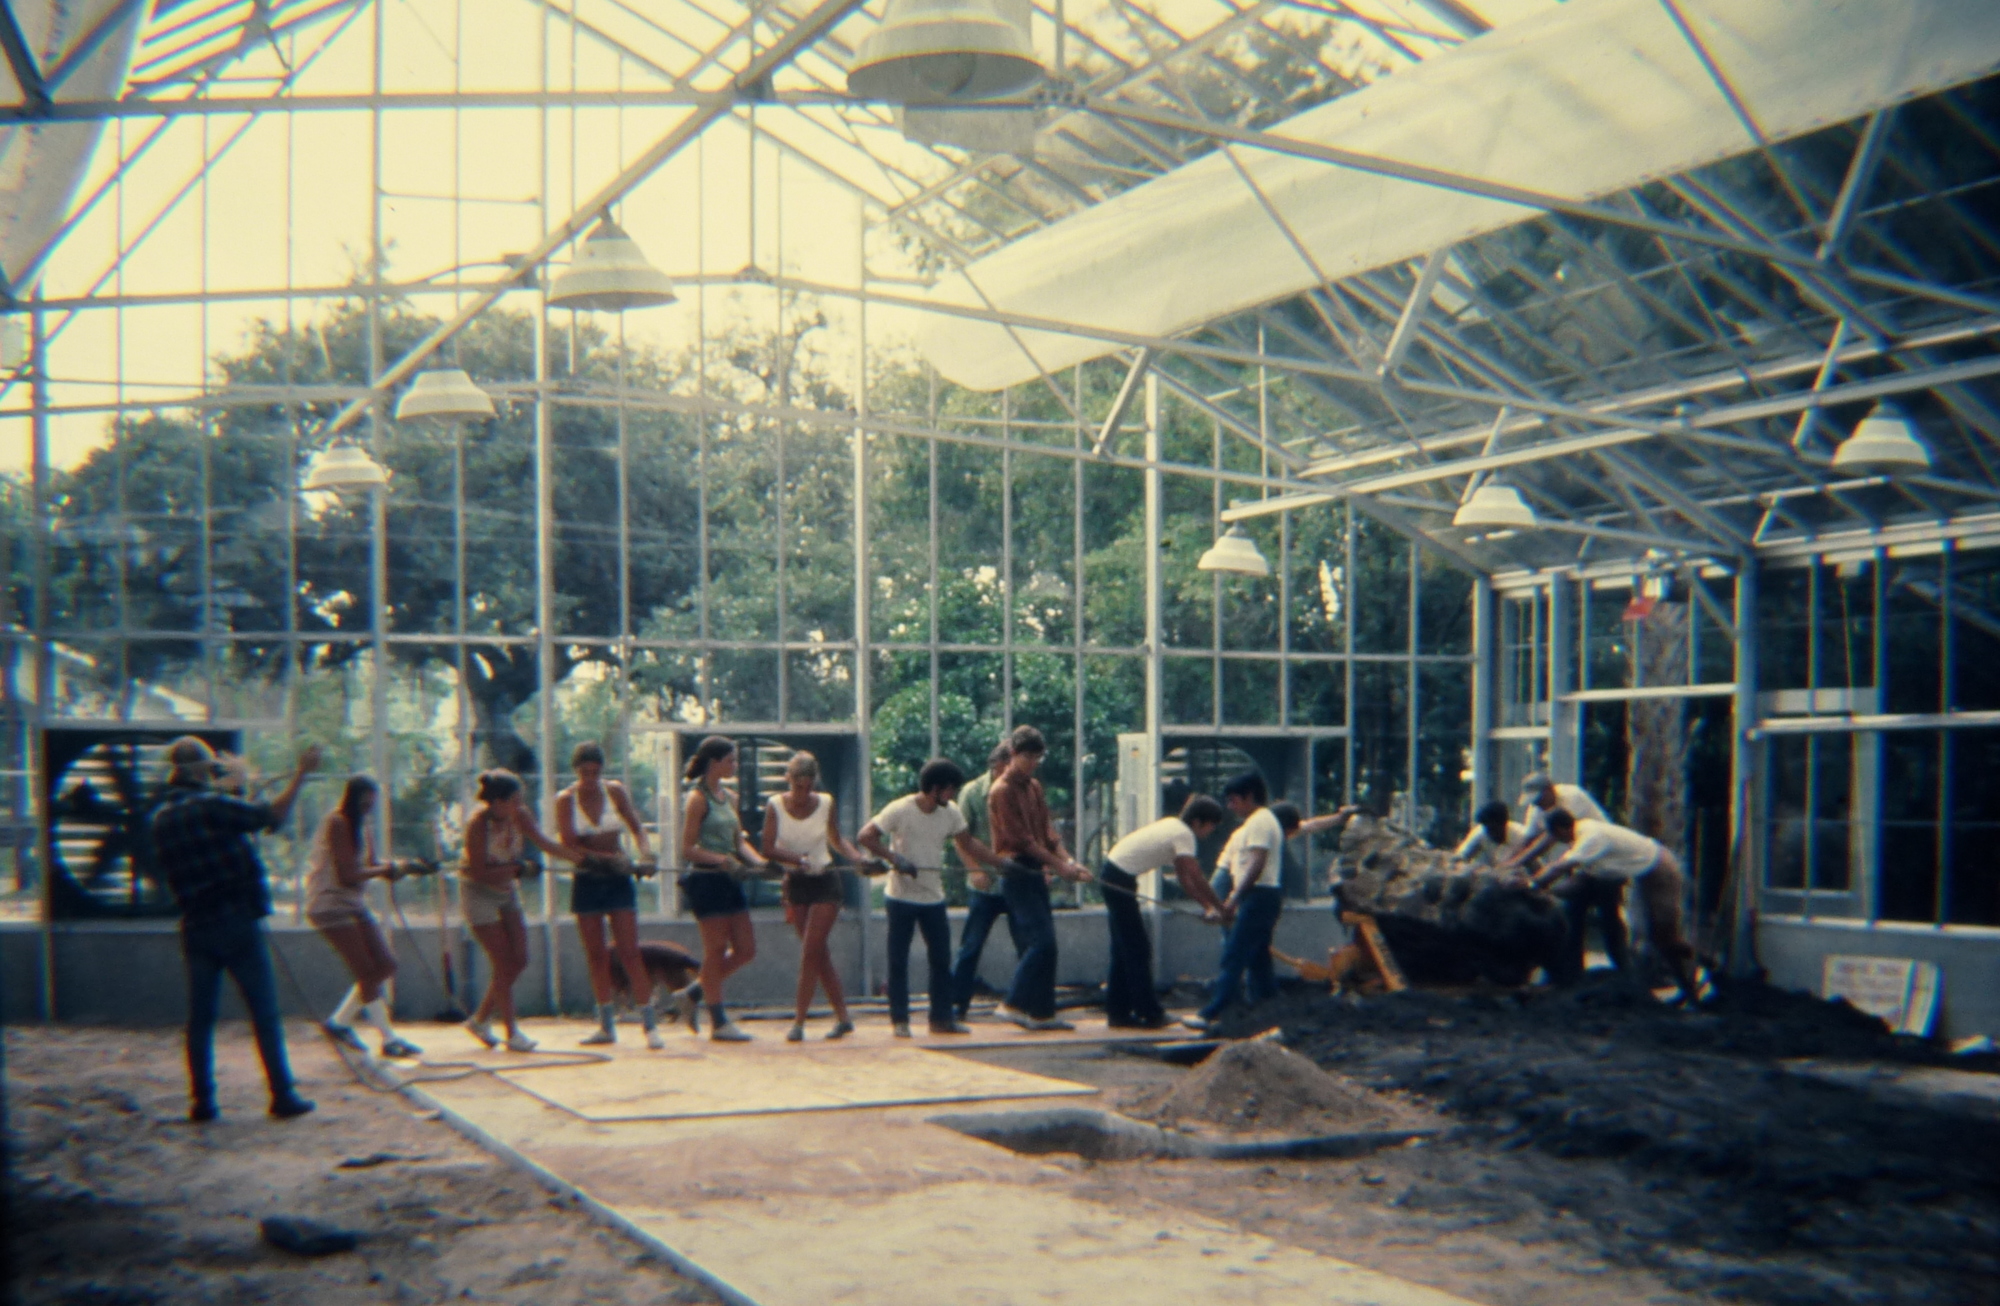 Placing rocks in what is now the Tropical Conservatory in 1974.